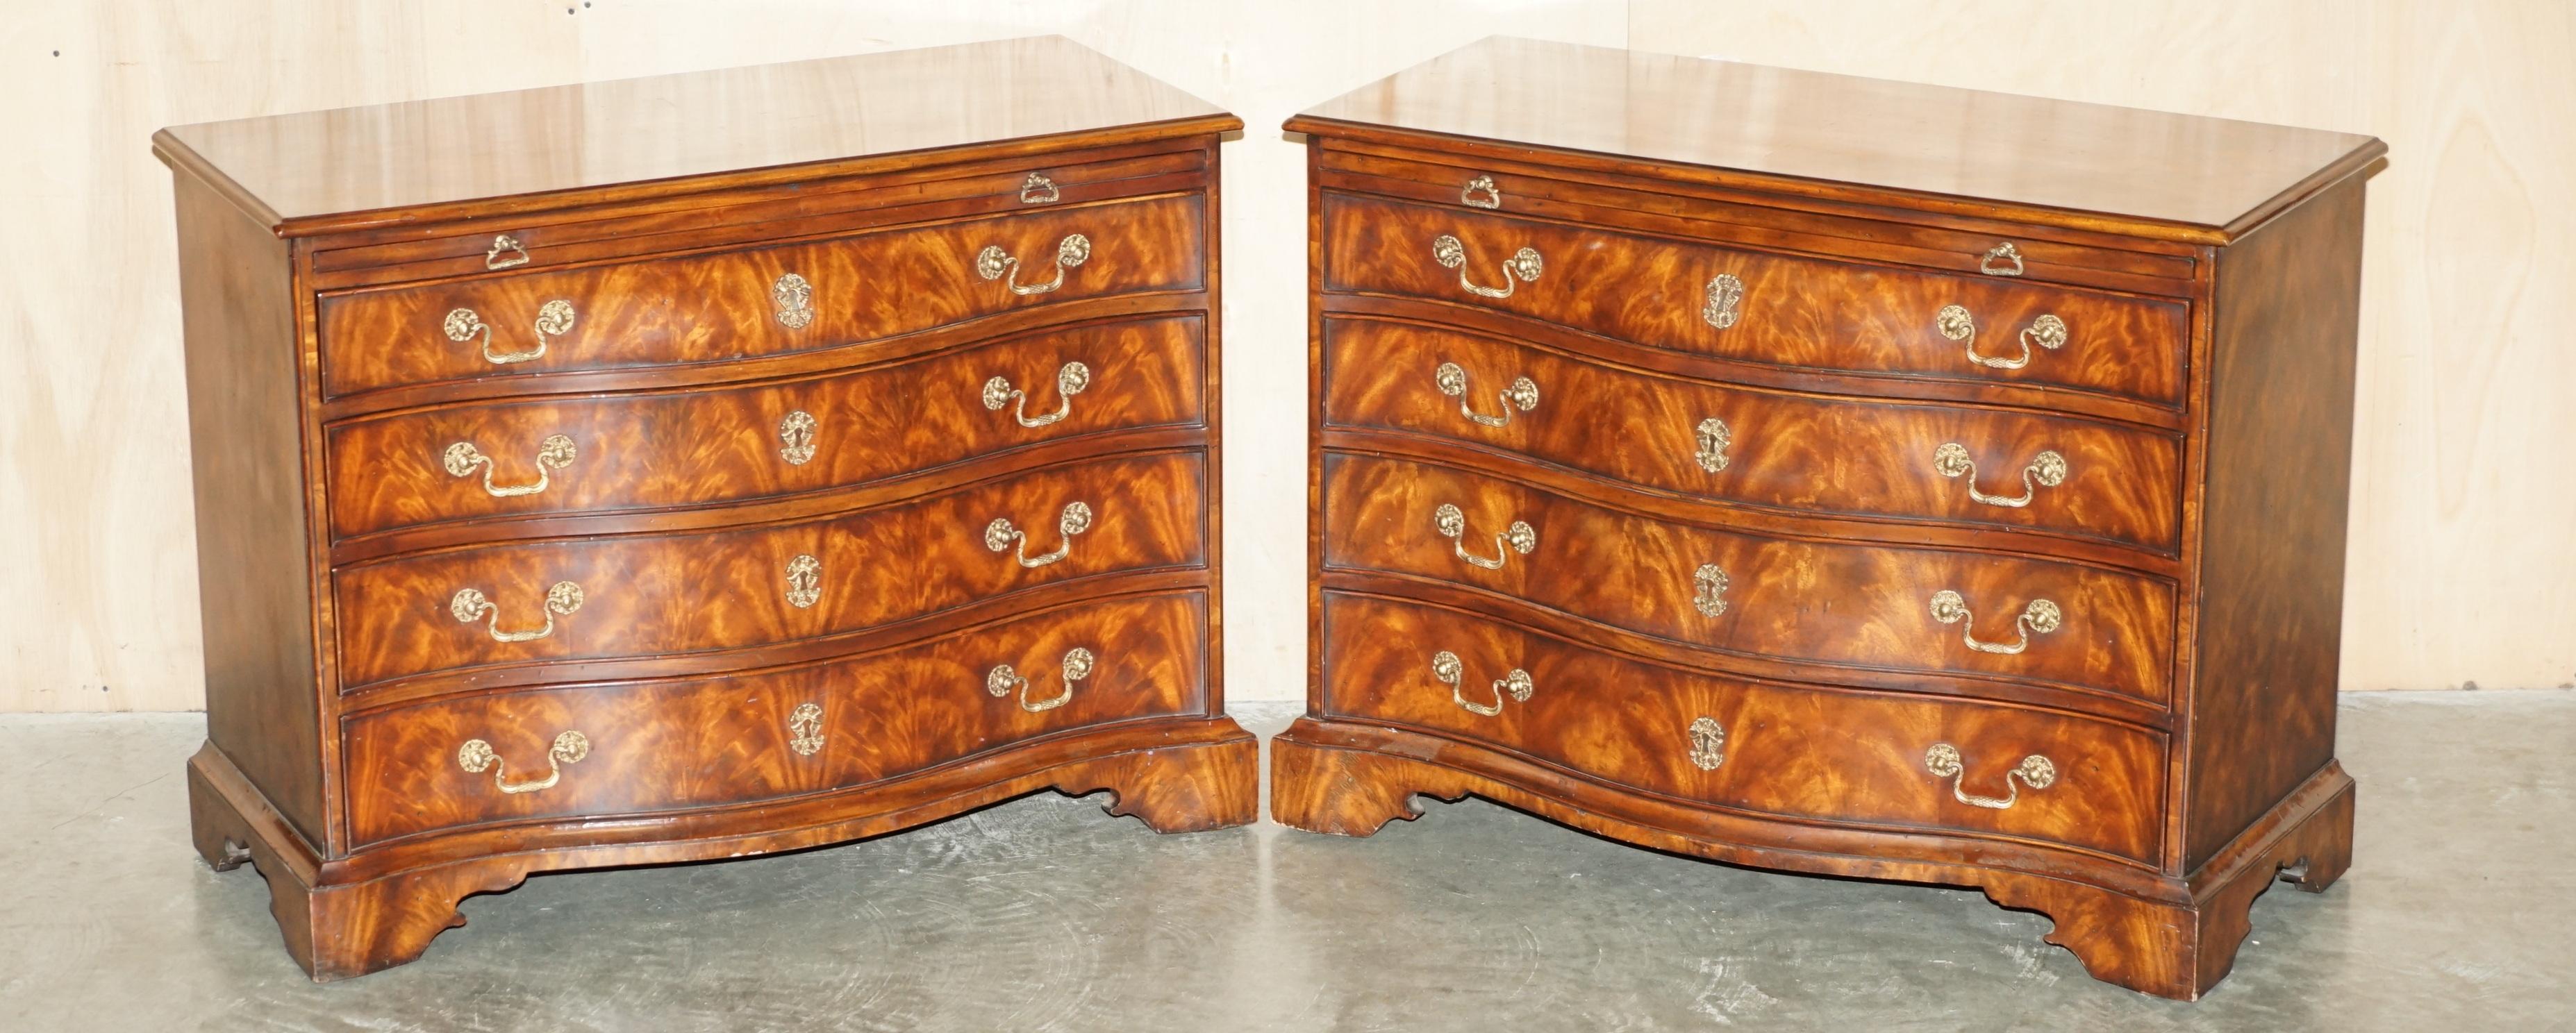 Royal House Antiques

Royal House Antiques is delighted to offer for sale this absolutely exquisite pair of fully restored Althorp Spencer House Flamed Mahogany chest of drawers, designed by Lord Spencer who was Princess Diana's brother 

Please